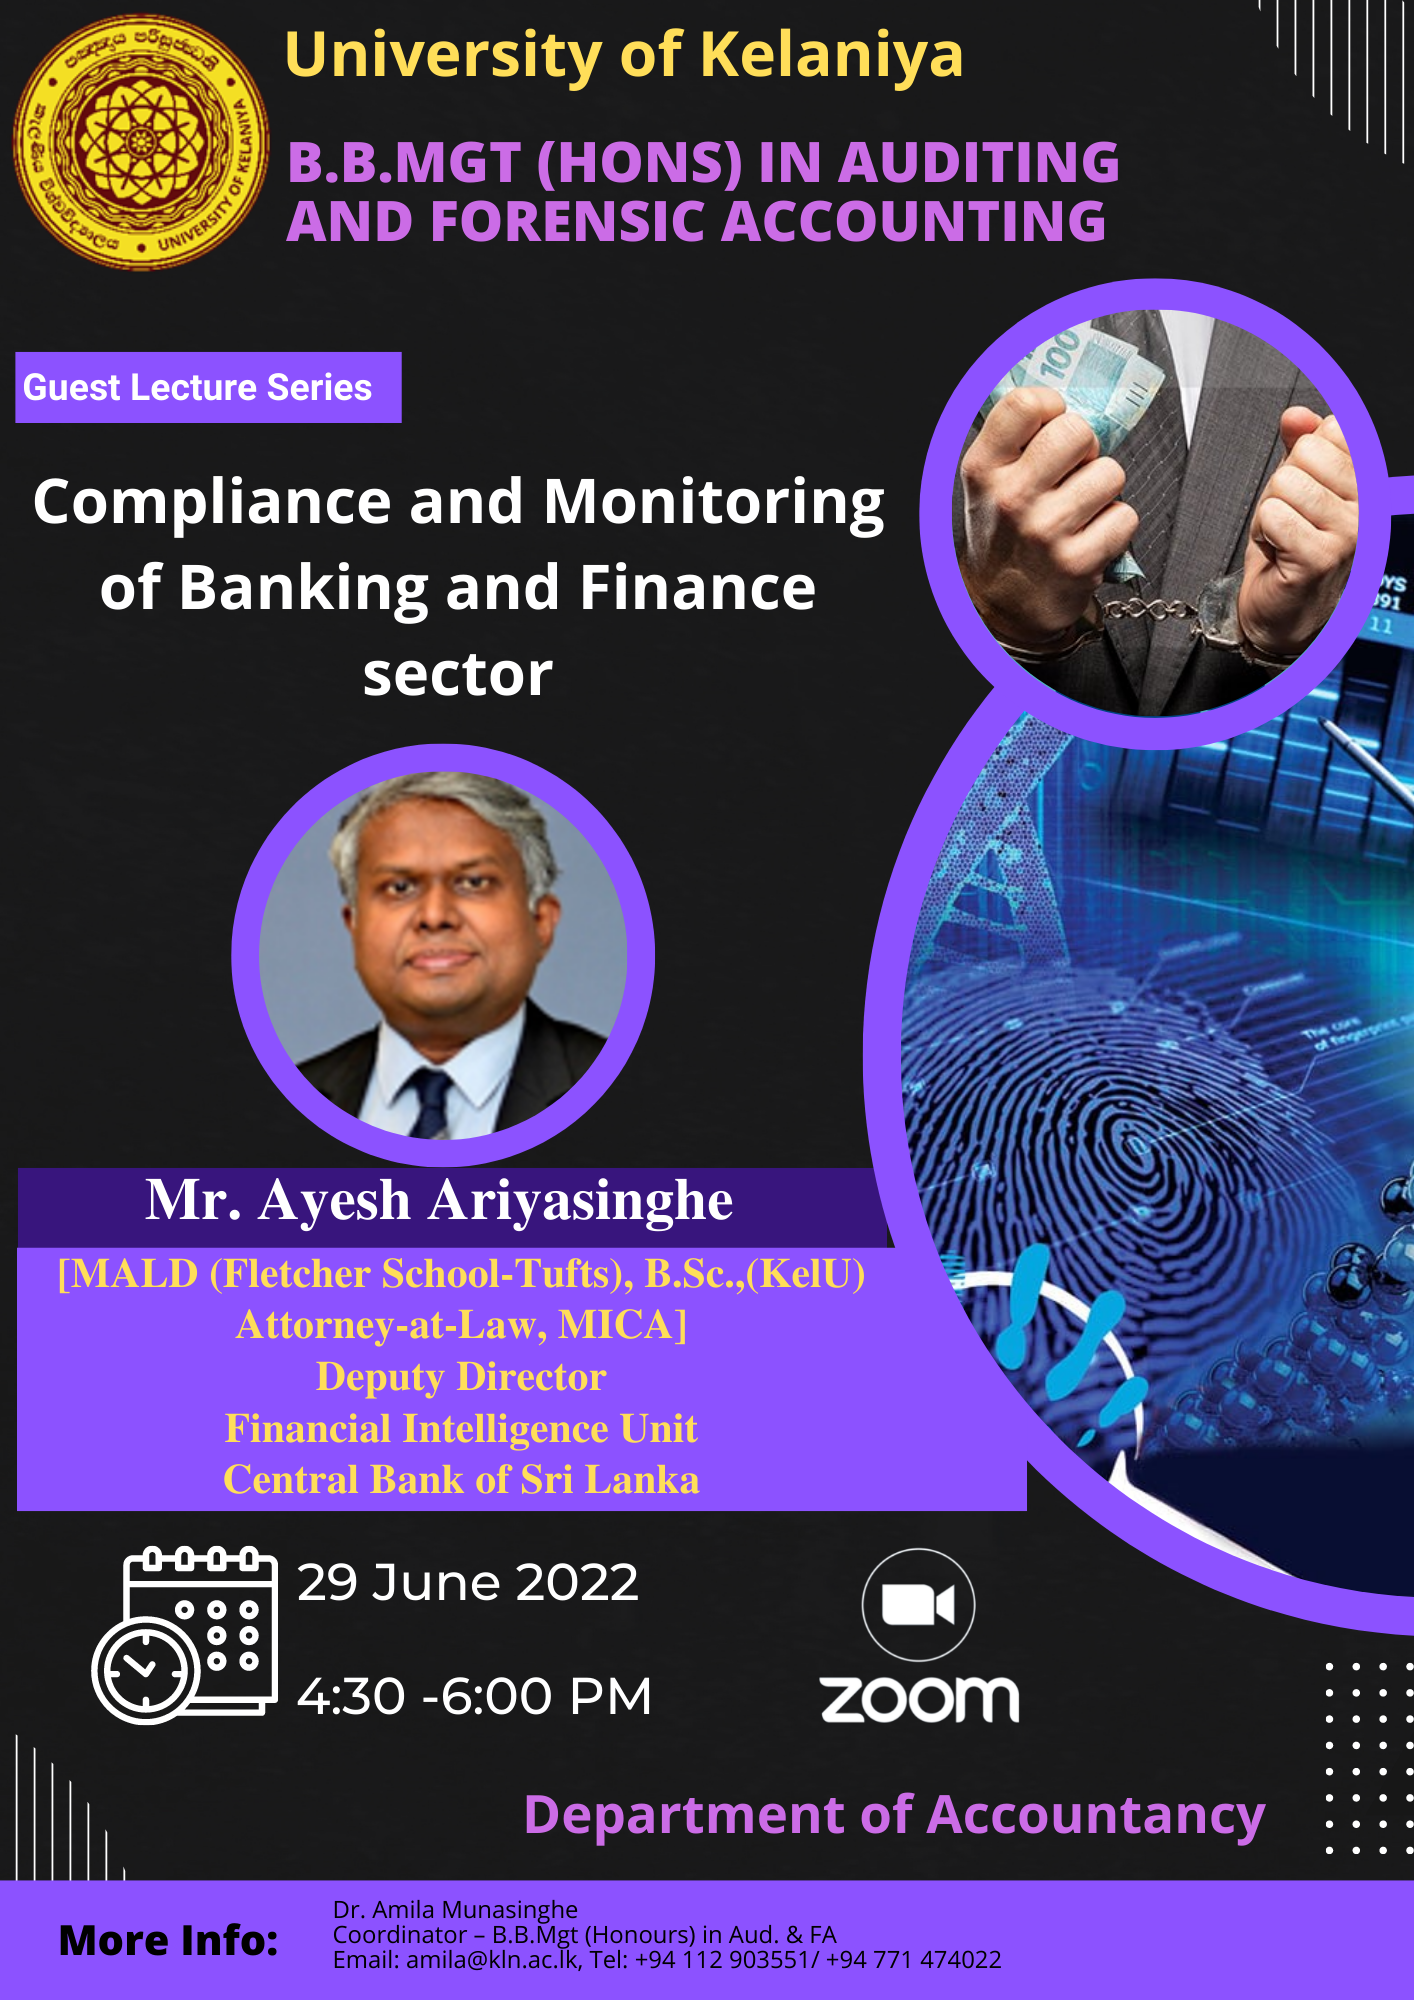 Guest lecture on compliance and monitoring of banking and finance sector